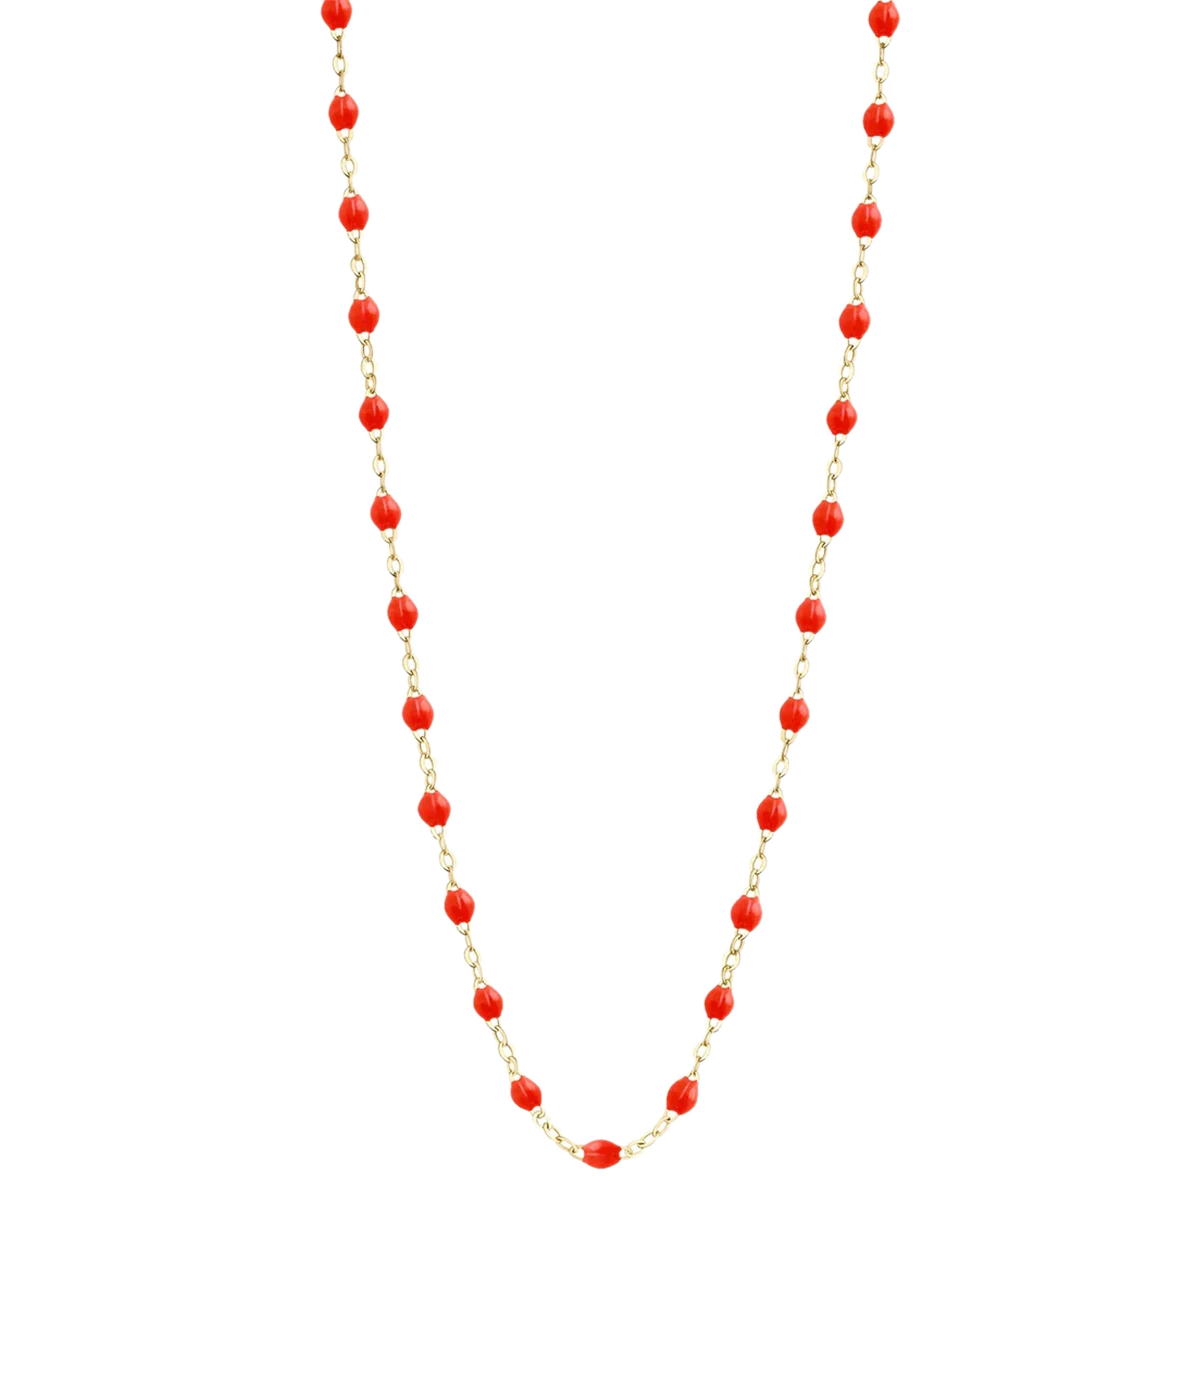 Classic Gigi 45cm Necklace in 18K Yellow Gold & Coral